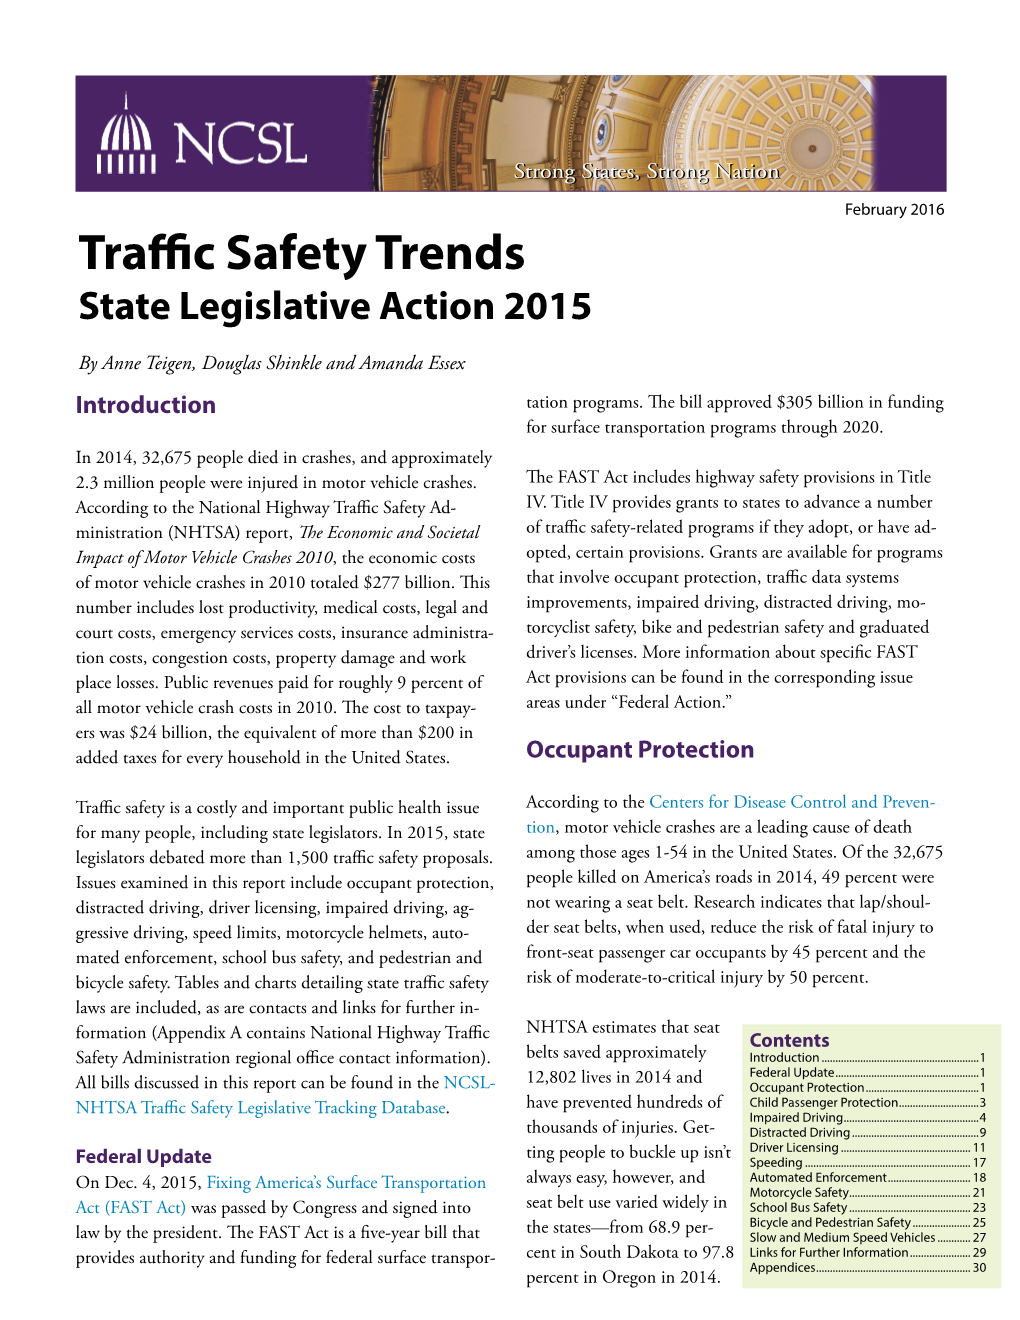 Traffic Safety Trends: State Legislative Action 2015 © 2016 National Conference of State Legislatures Seats, to Wear Safety Belts